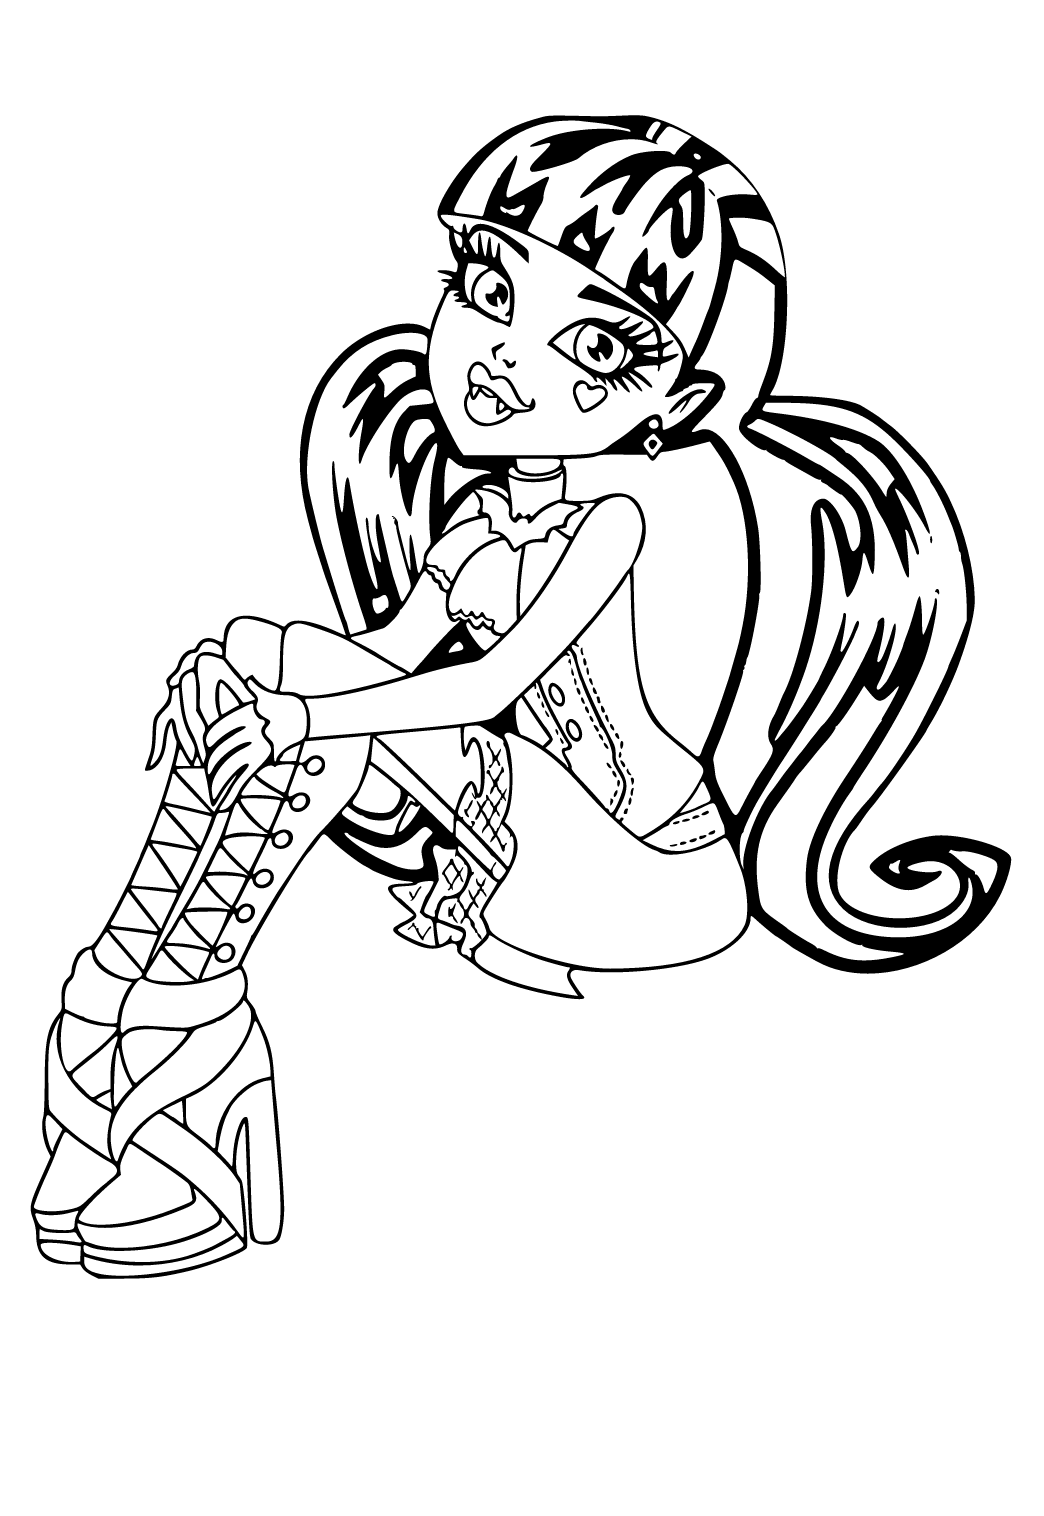 COLORIAGE - Monster High